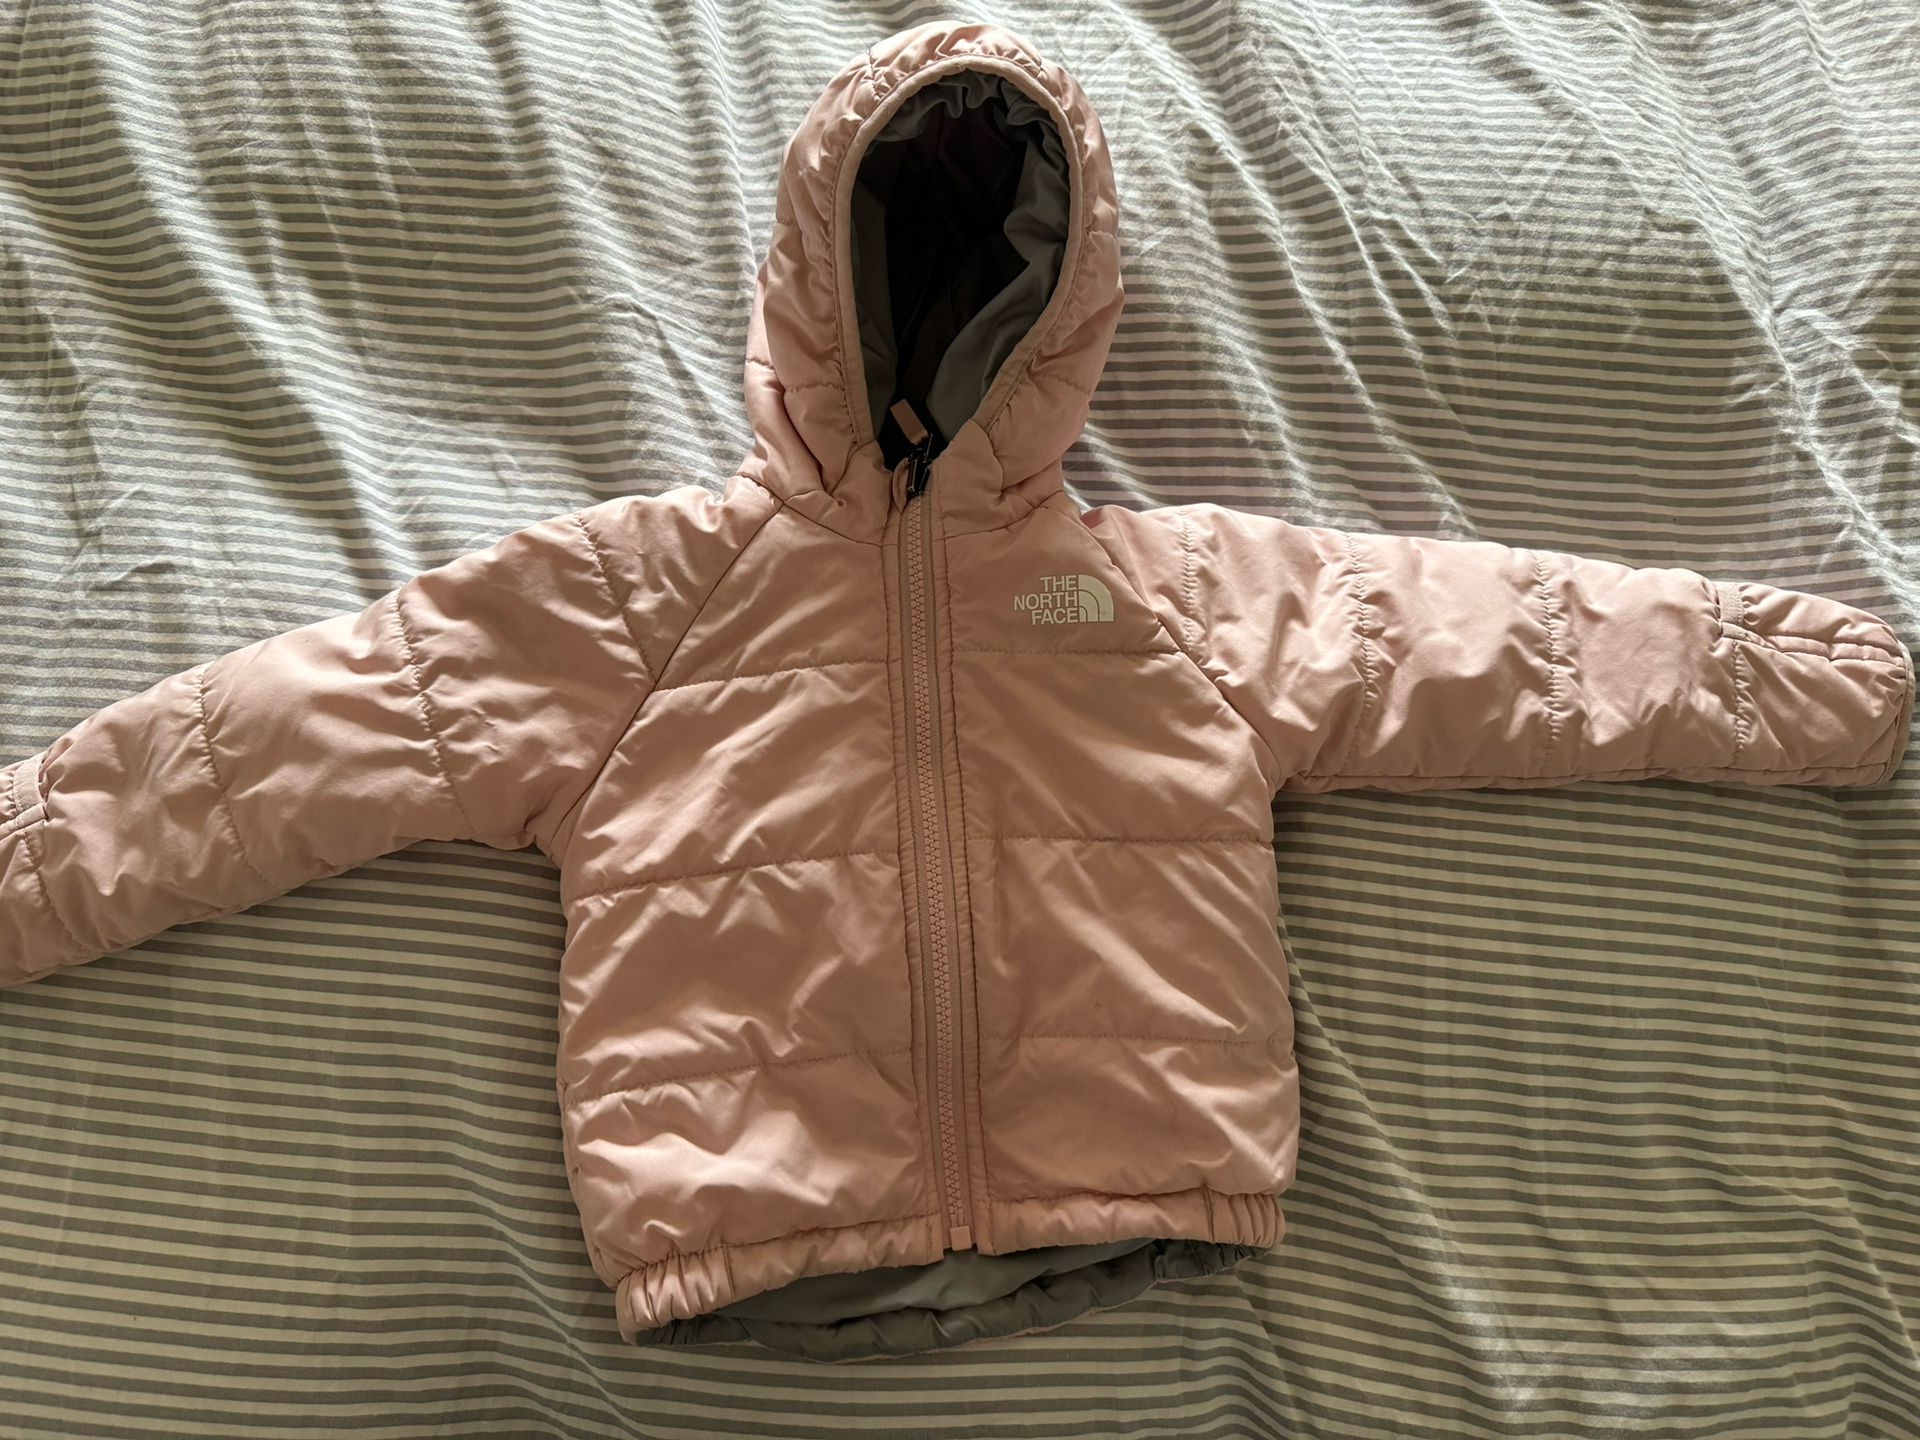 The North Face Toddler Jacket- Size 2T  $30